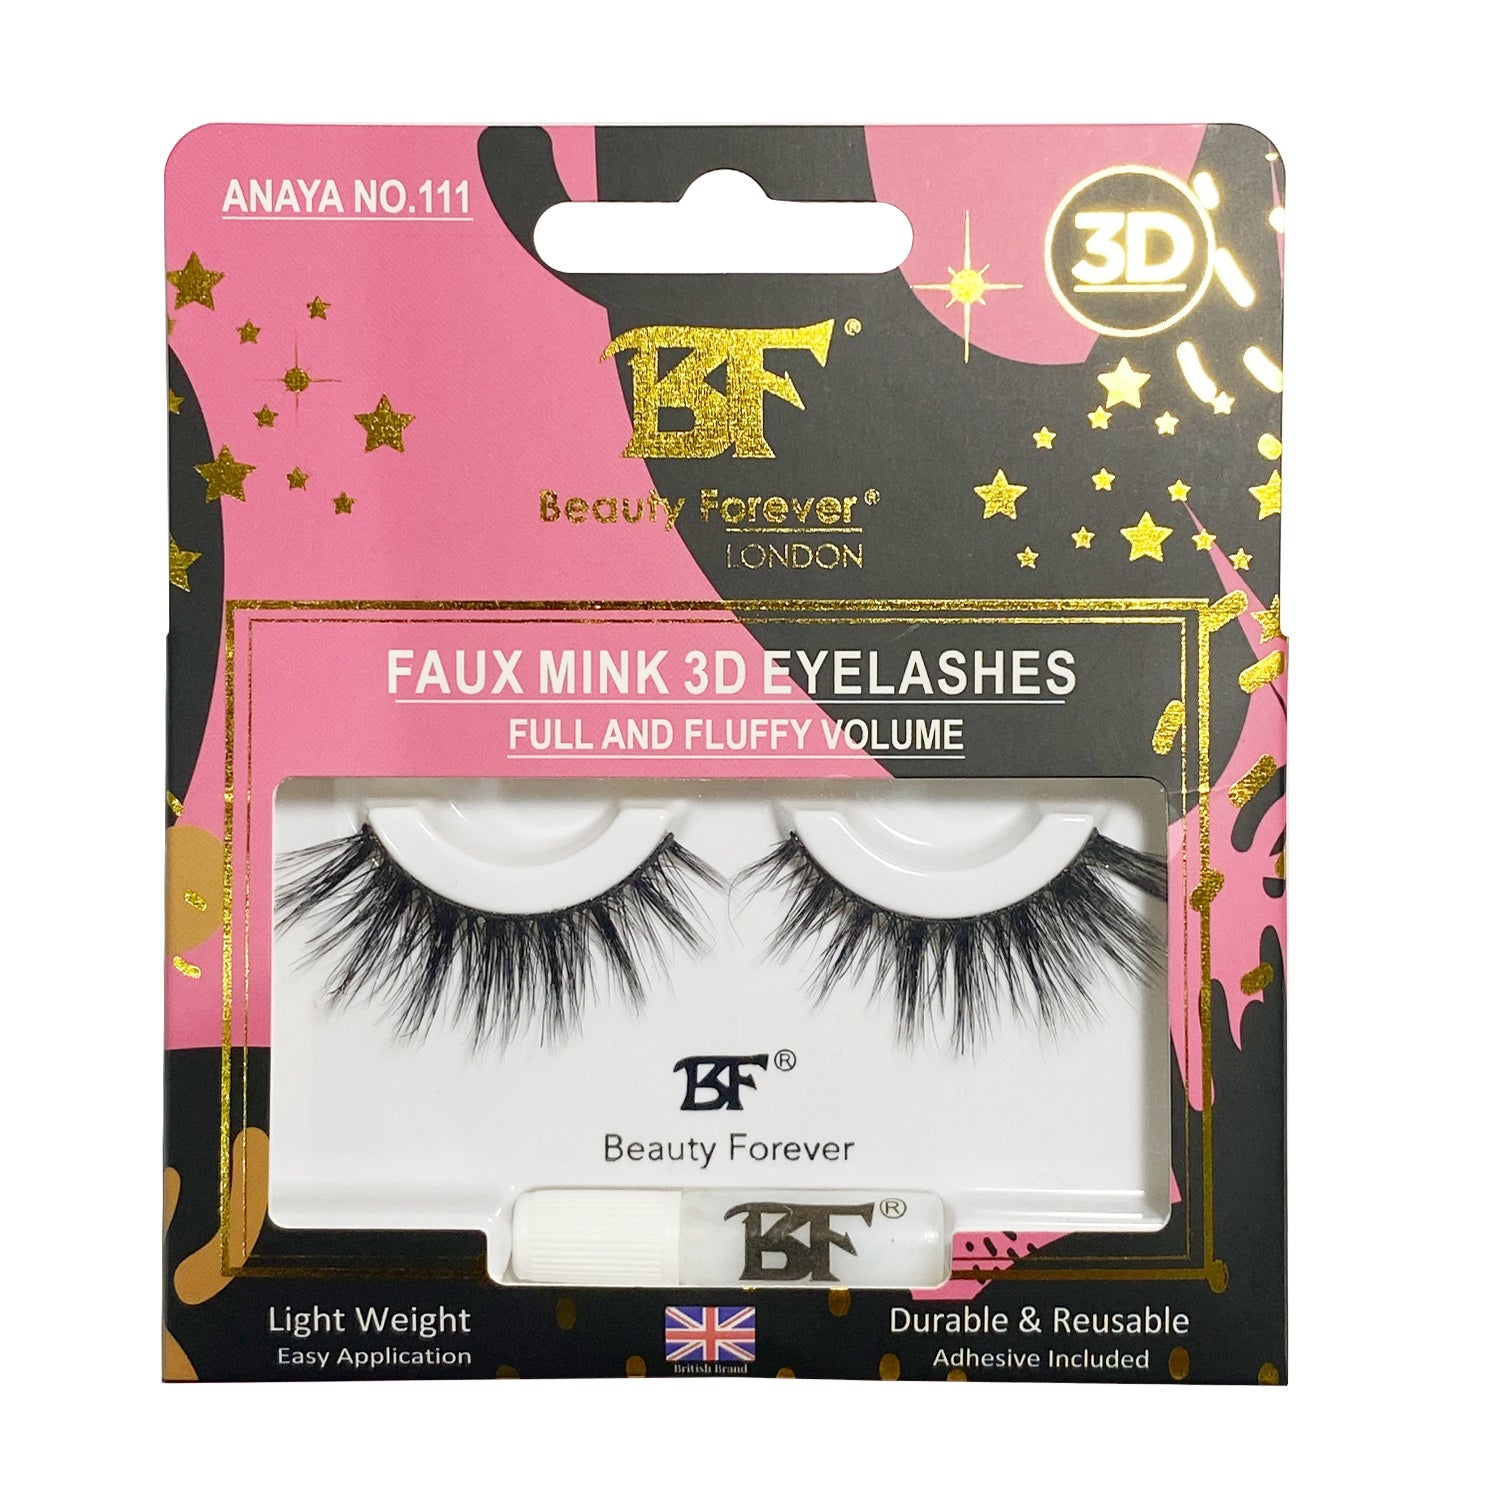 Faux Mink 3D Eyelashes- Anaya No. 111 Full and Fluffy Volume - Beauty Forever London